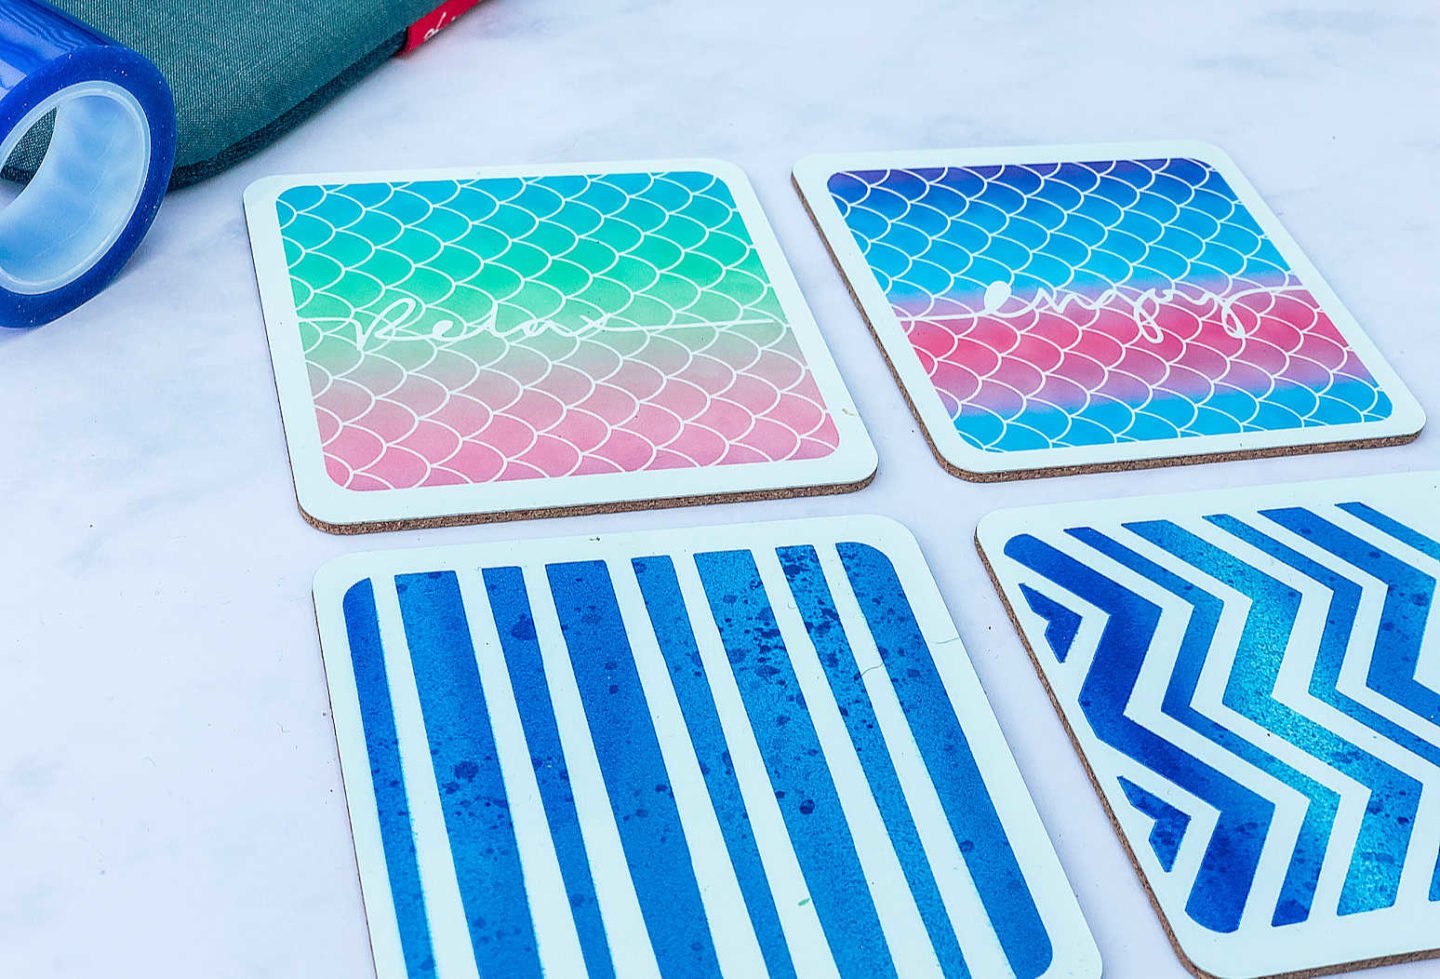 personalised coasters made with Cricut